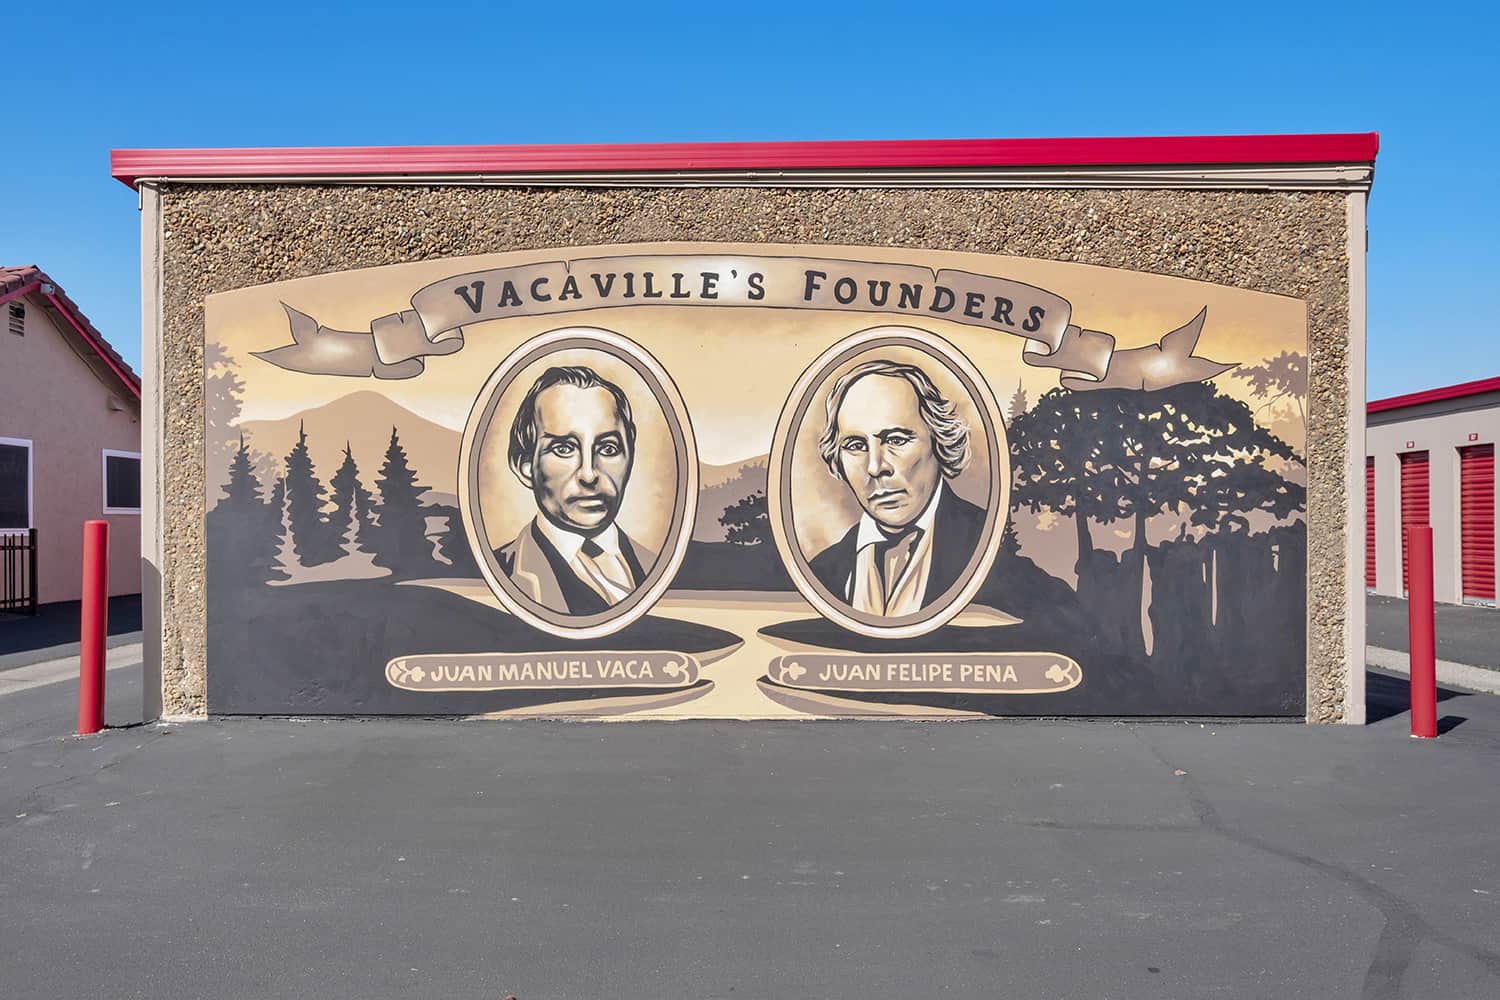 13-facts-about-art-and-music-scene-in-vacaville-california